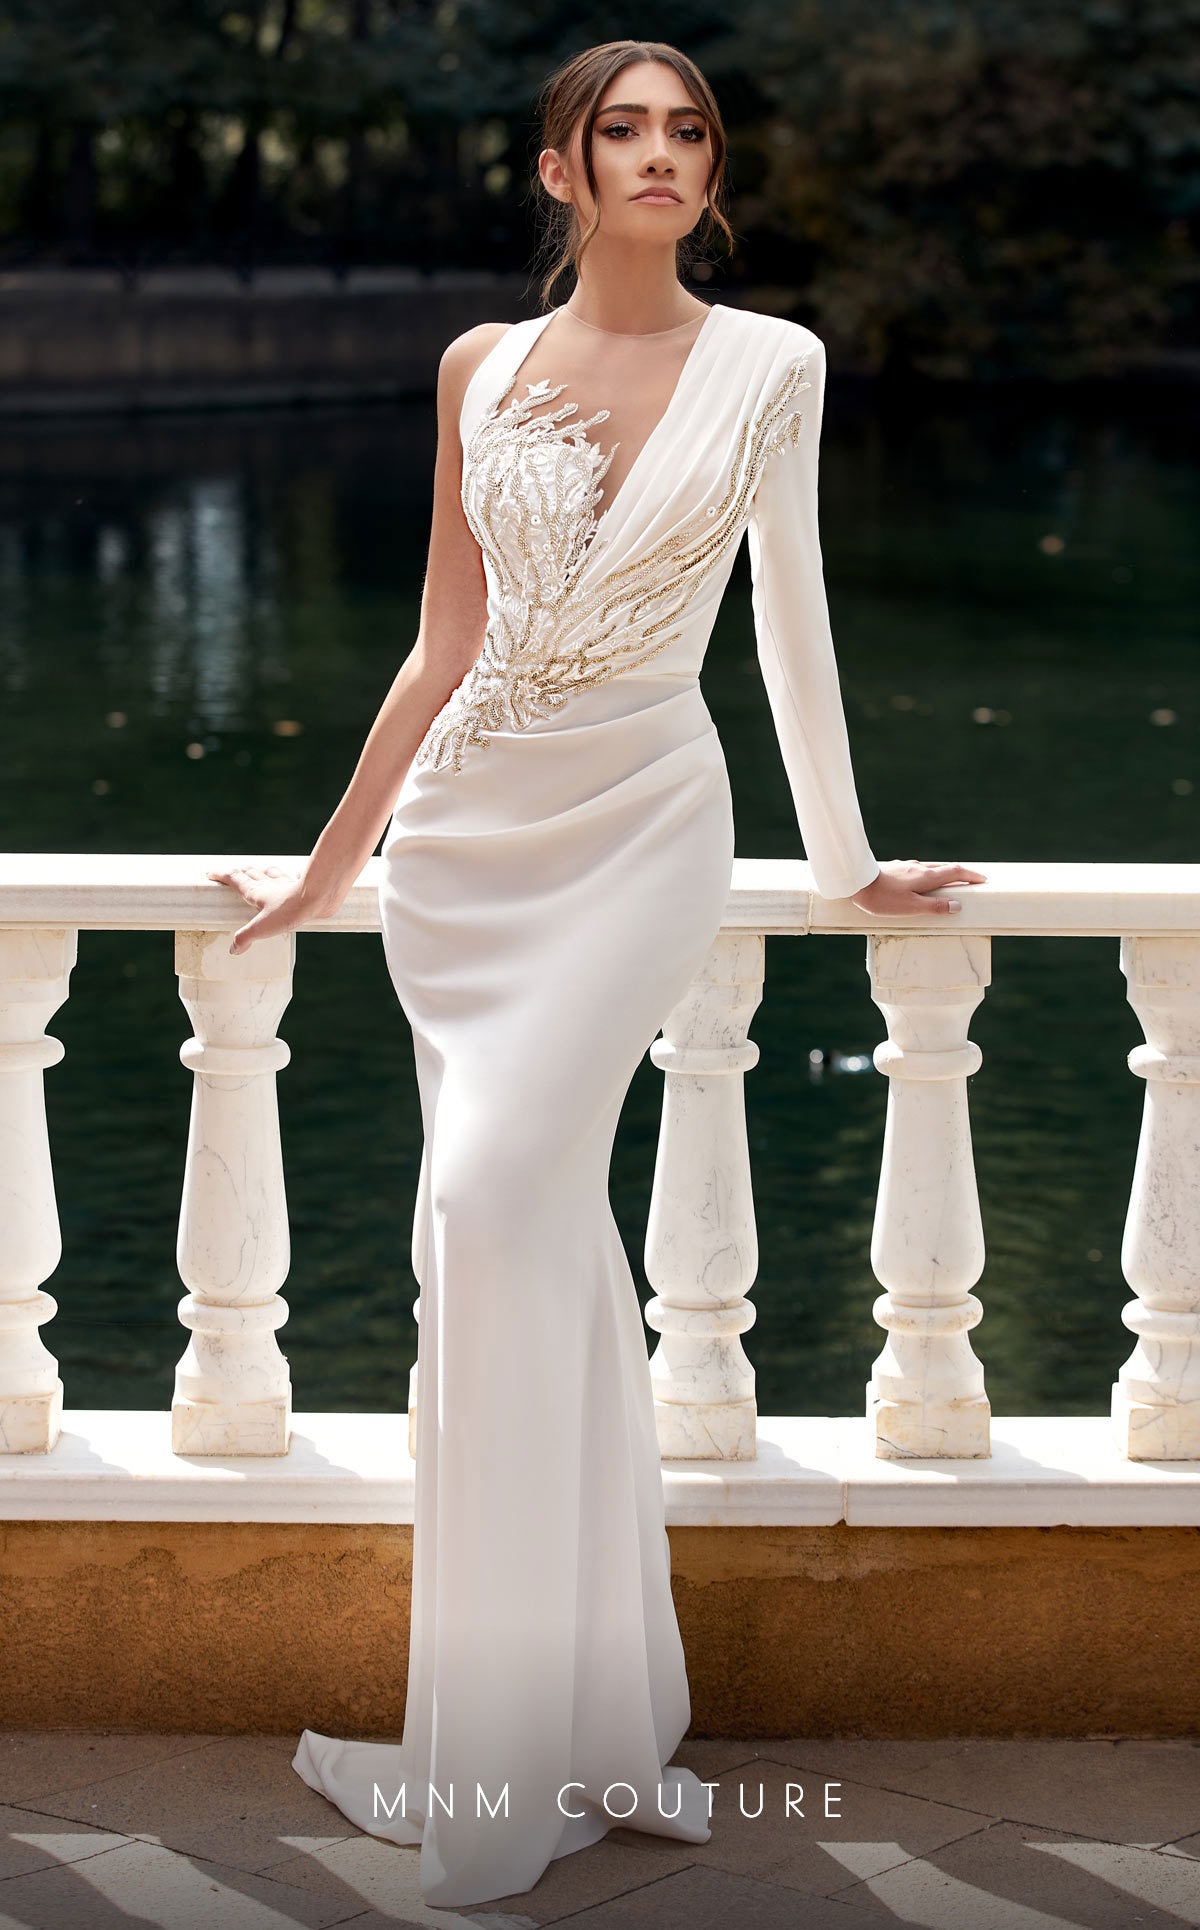 Brady | One Sleeve Beaded Gown | MNM Couture K3940